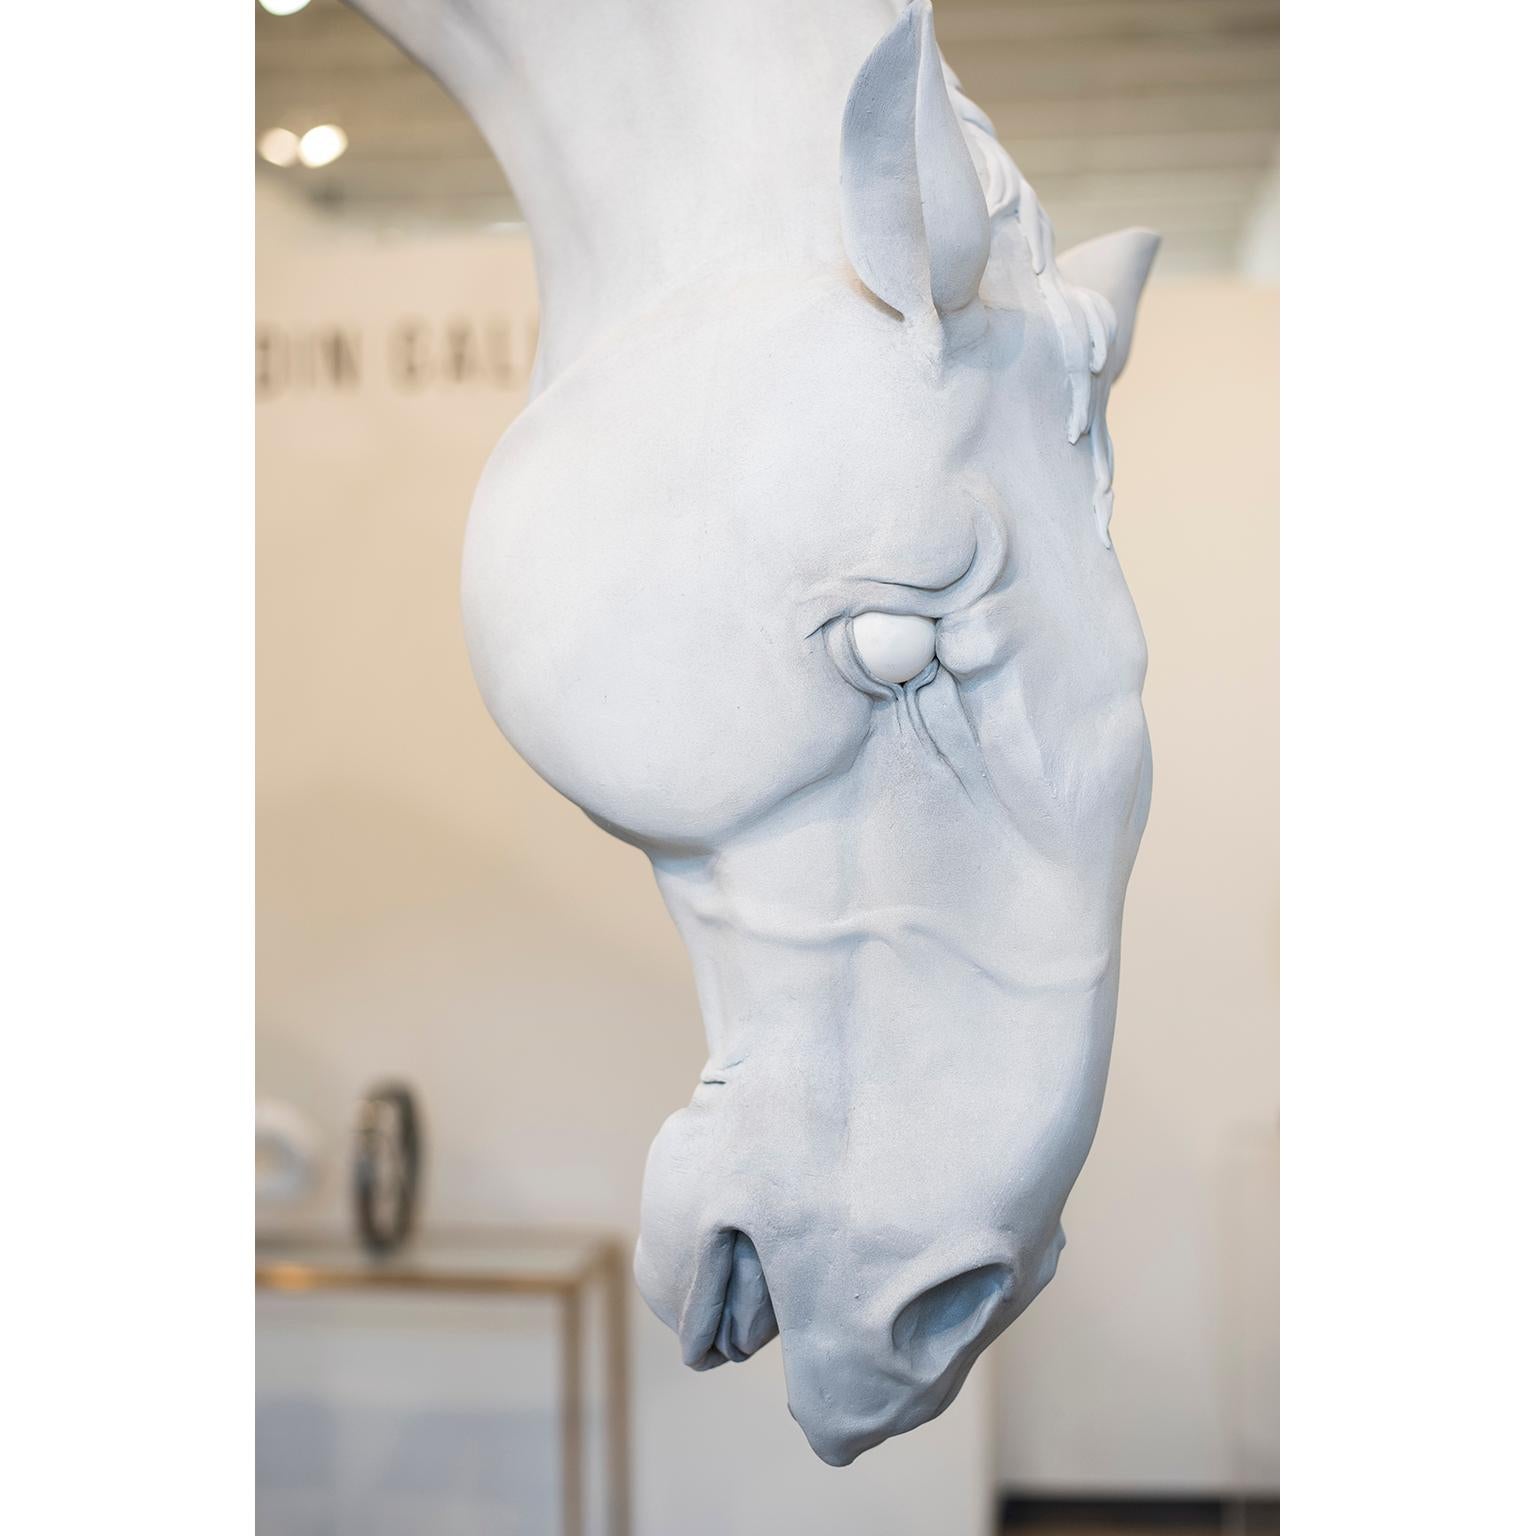 The Horse by Hobbes Vincent is an original sculpture.
Epoxy resin plaster and bronze sculpture. 
150 × 96 × 36 inch; 381 × 243.8 × 91.4 cm

The Horse, from his solo exhibition, At the Circus. The white horse is being lifted by a strong man and the 7